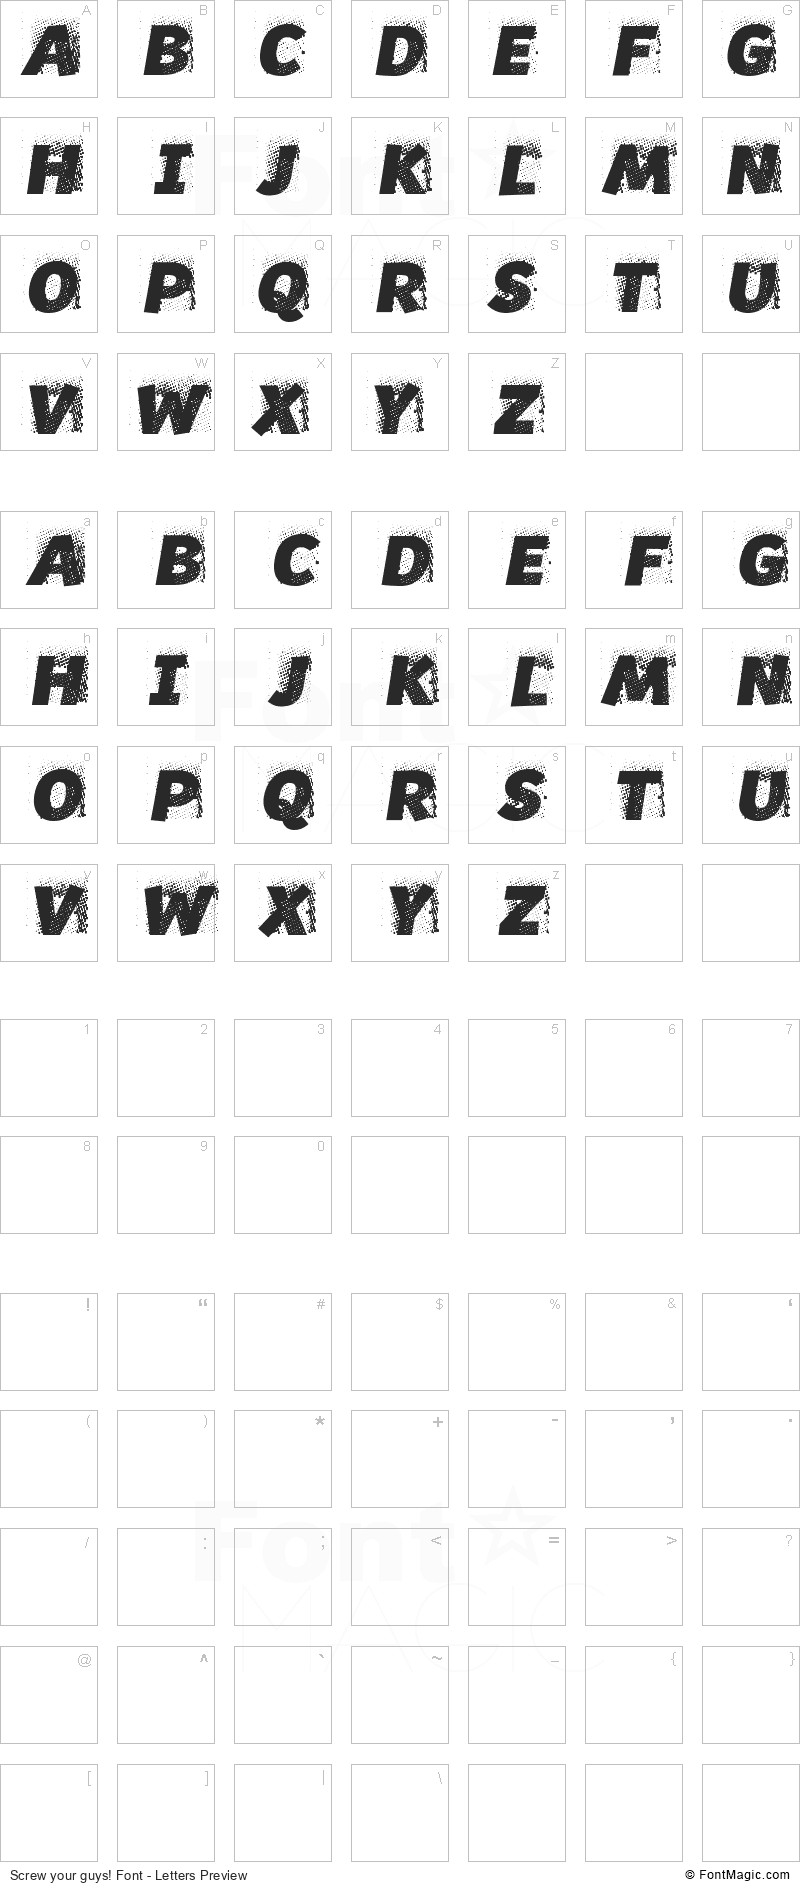 Screw your guys! Font - All Latters Preview Chart